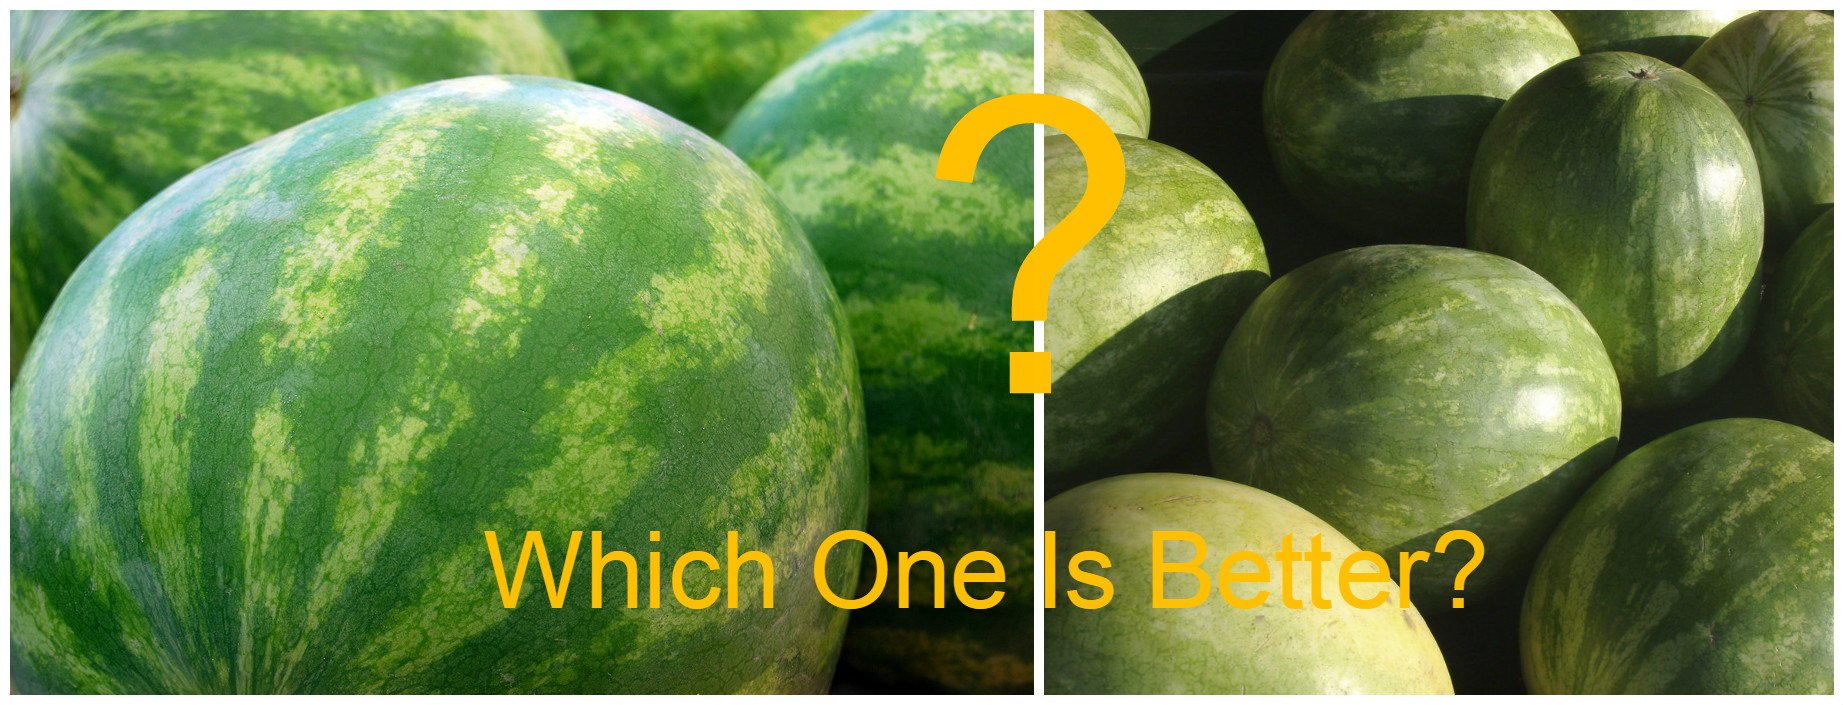 With These Hacks, You’ll Not Pick A Bad Watermelon Anymore